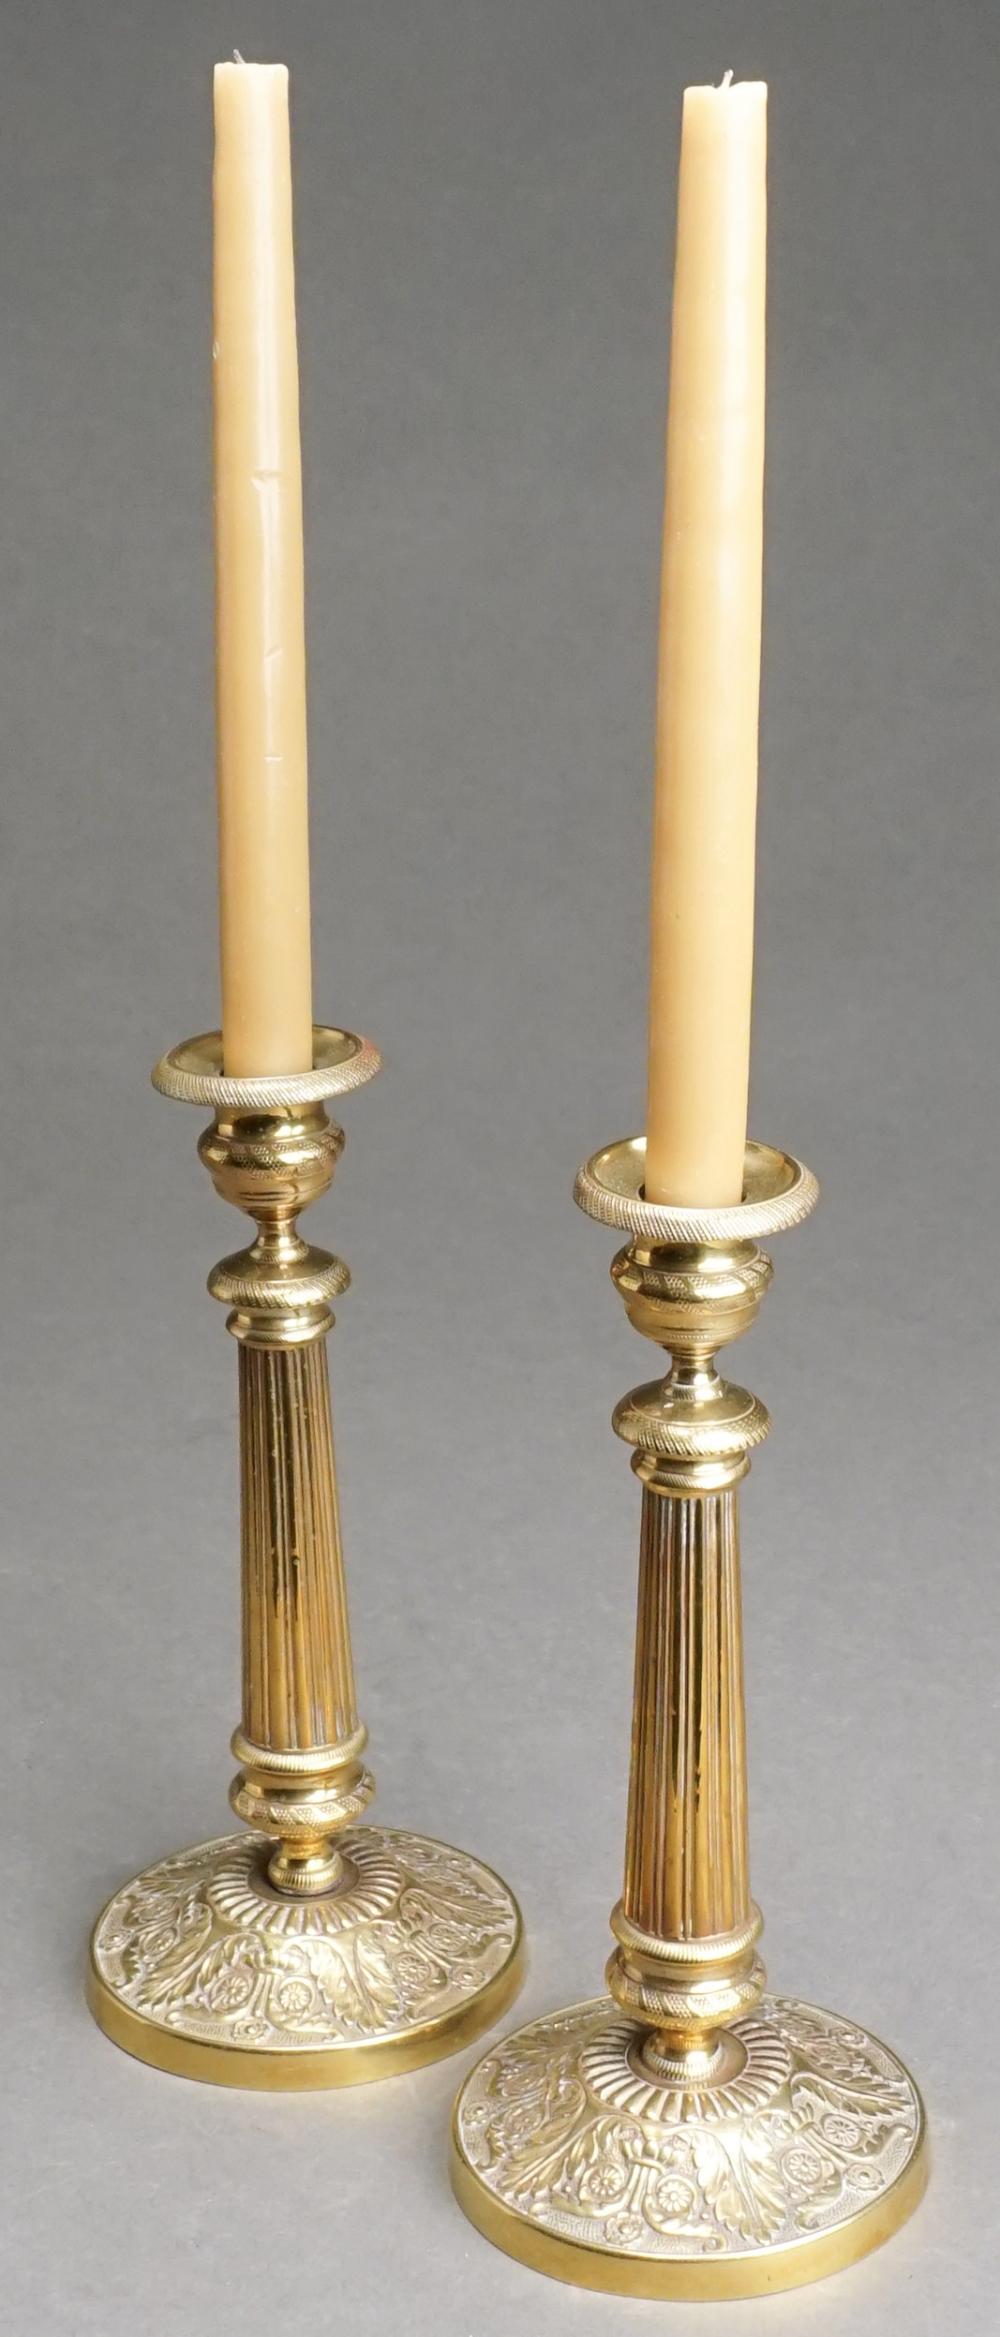 PAIR NEOCLASSICAL STYLE CAST BRASS